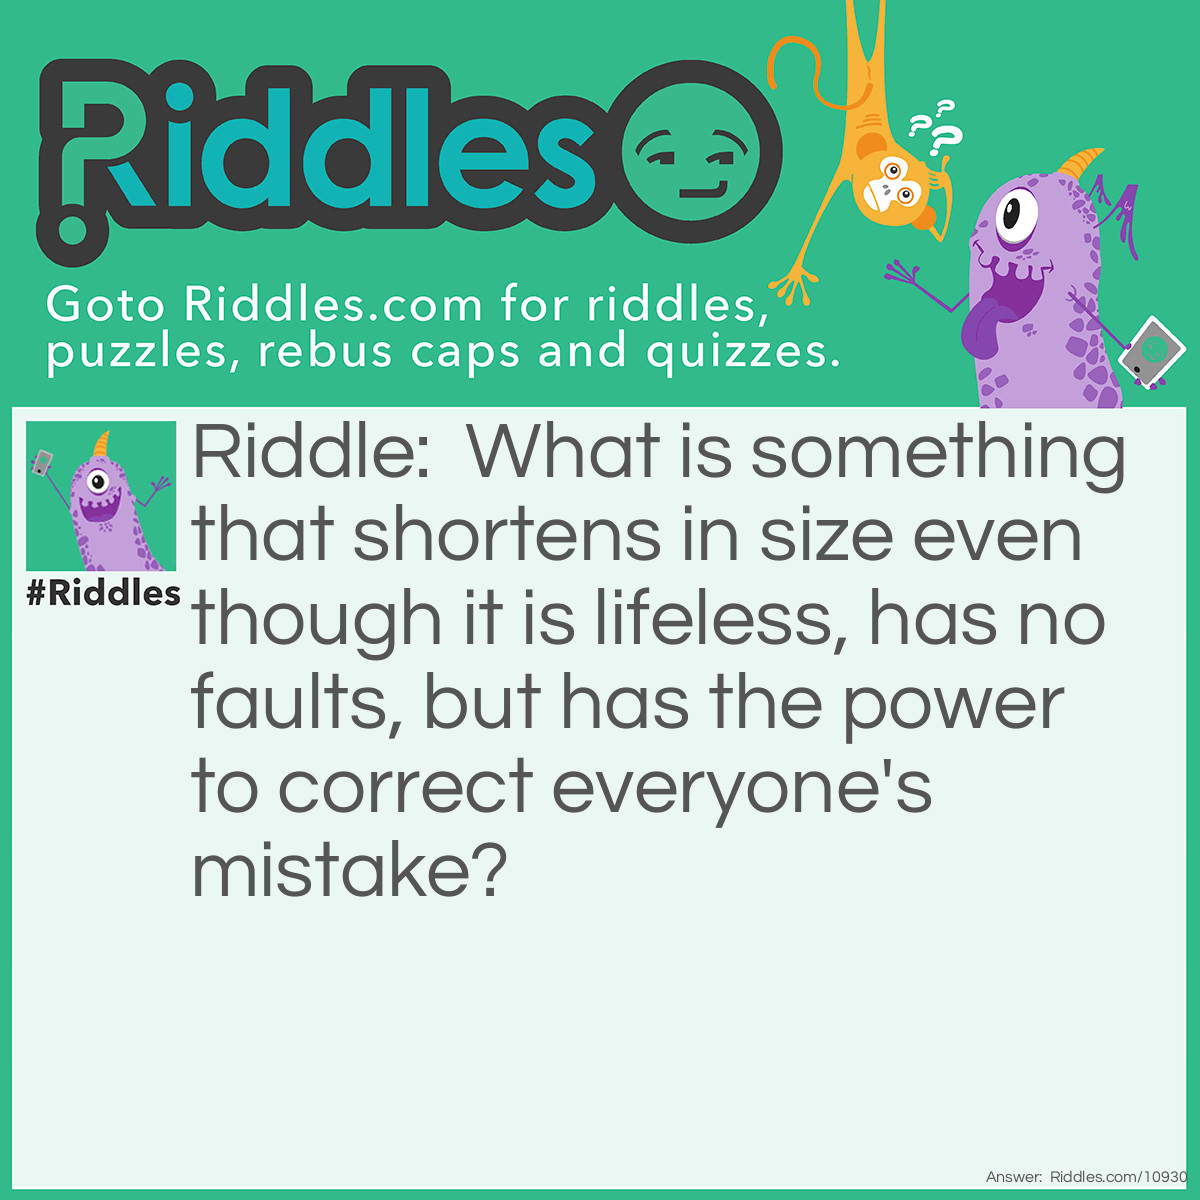 Riddle: What is something that shortens in size even though it is lifeless, has no faults, but has the power to correct everyone's mistake? Answer: An eraser.